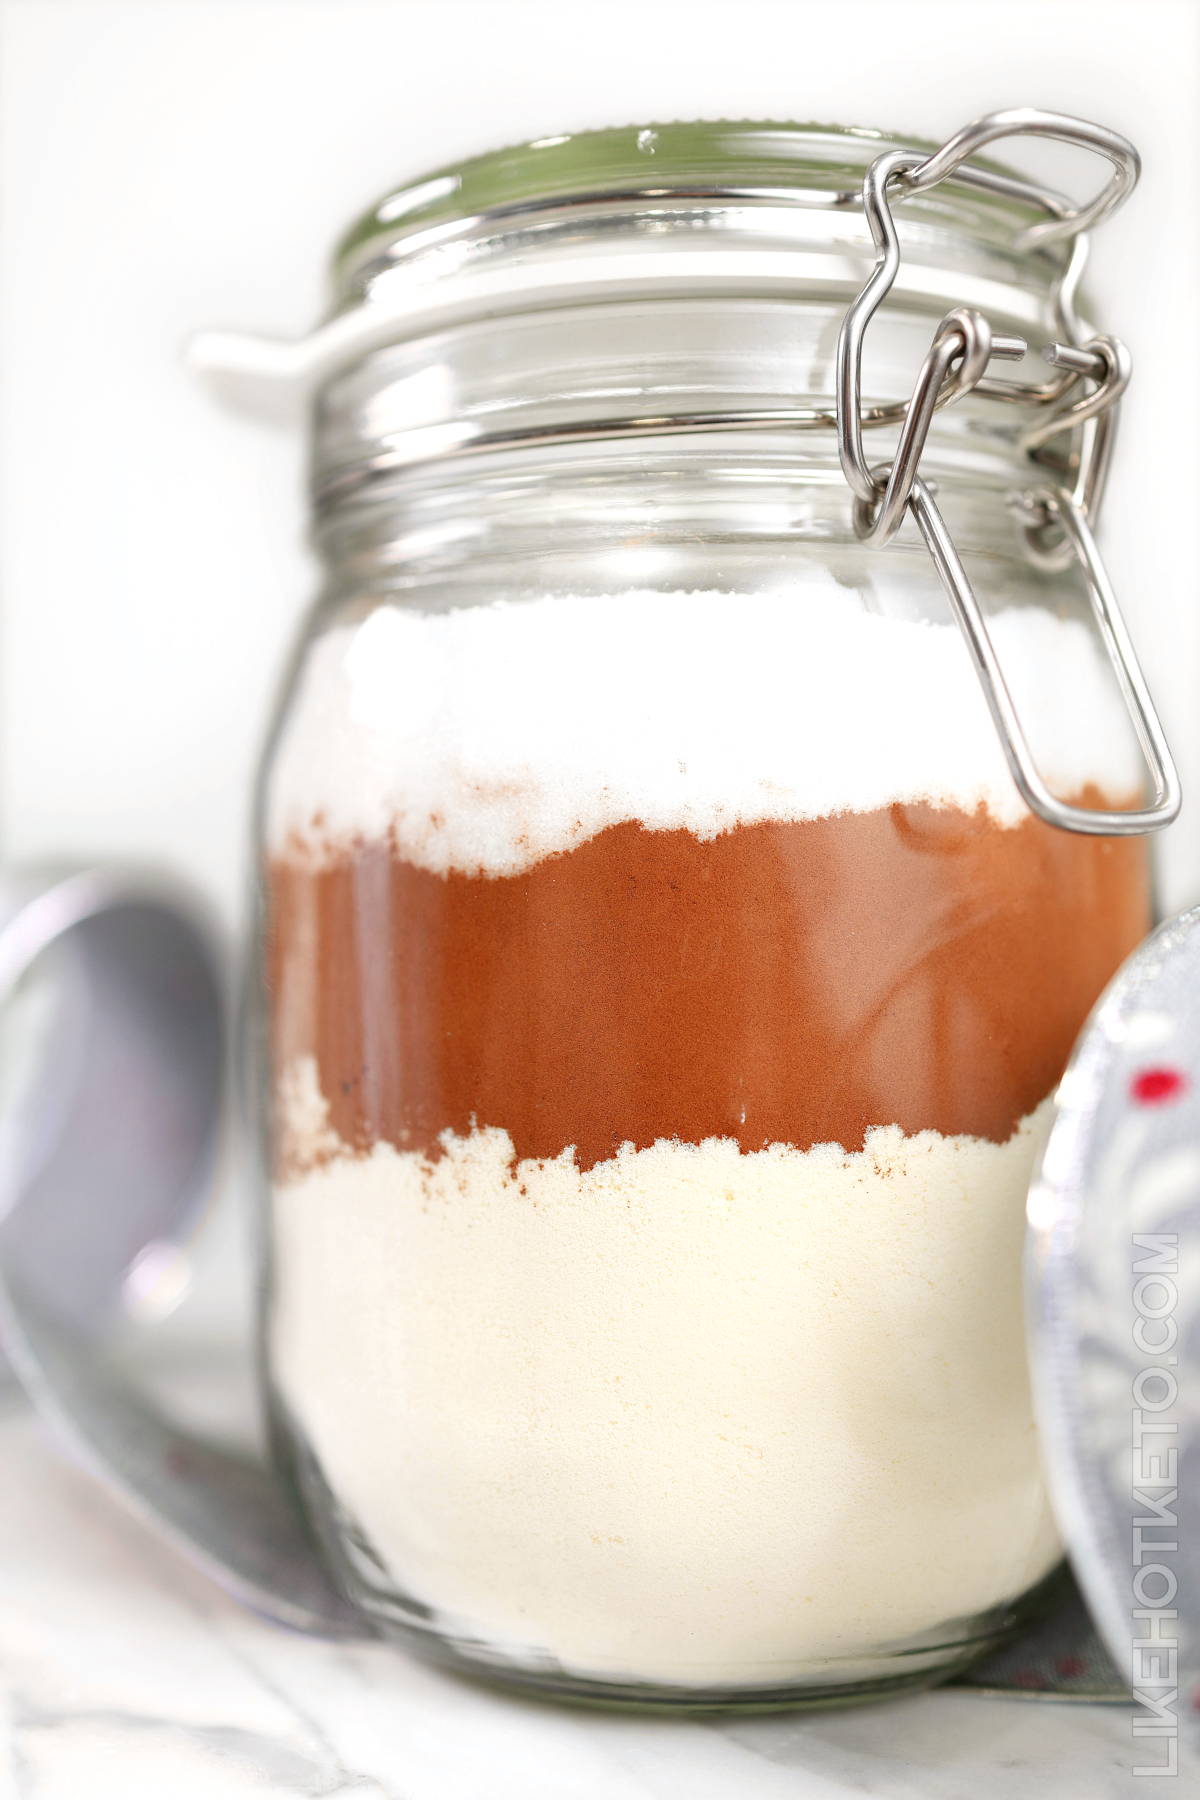 Mason jar with homemade high protein hot cocoa as a gift.